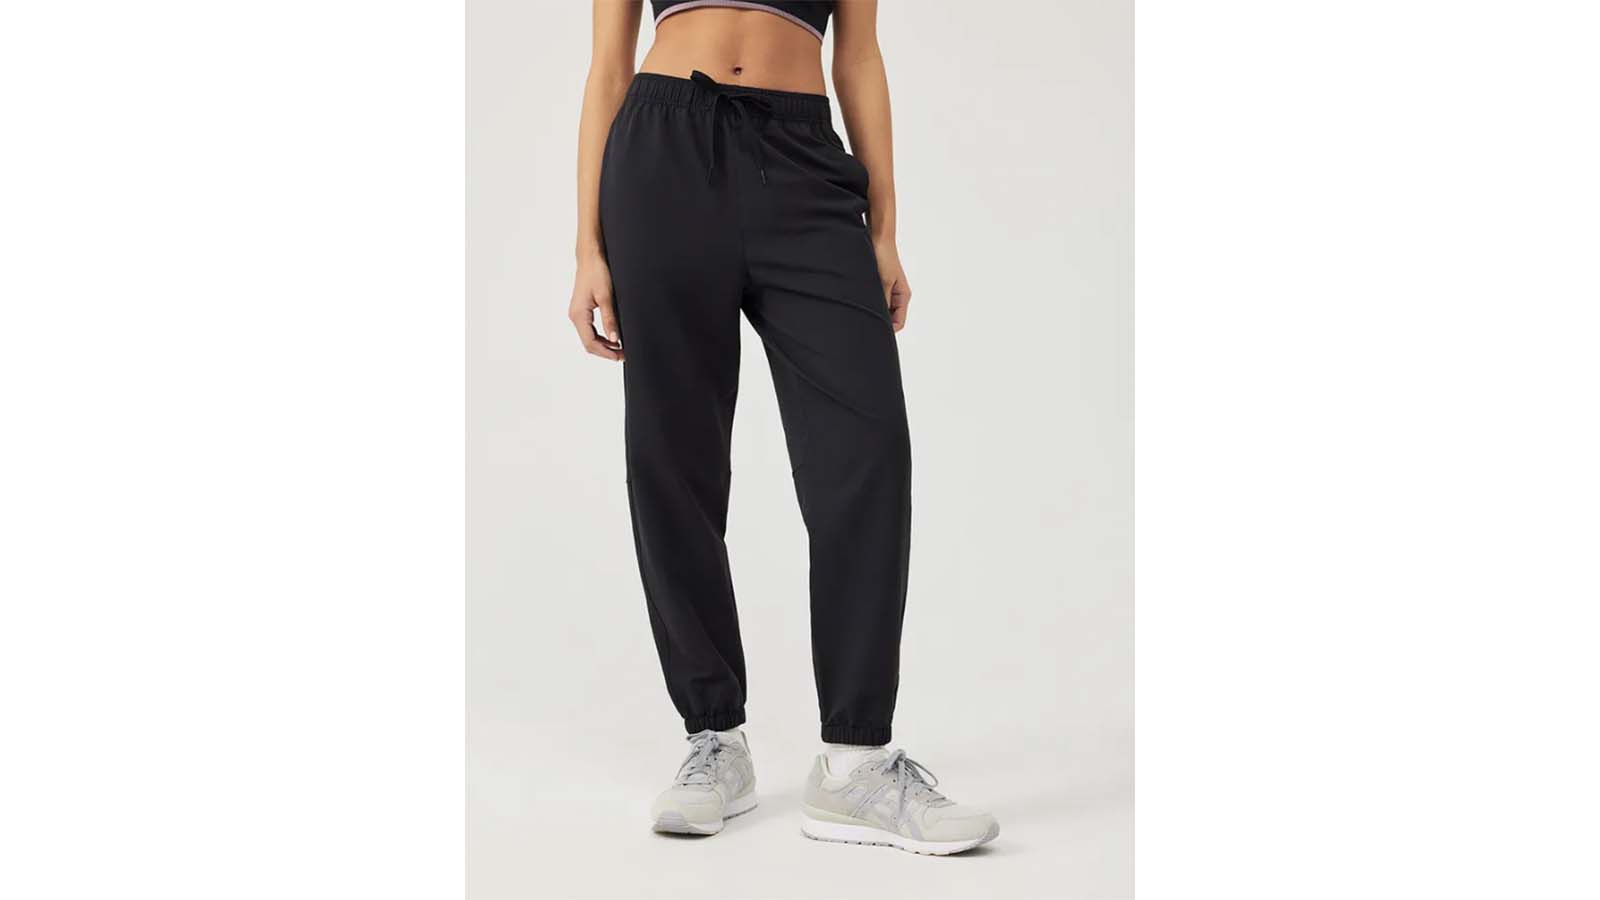 High Waisted Women's Sweatpants for Workouts and UK